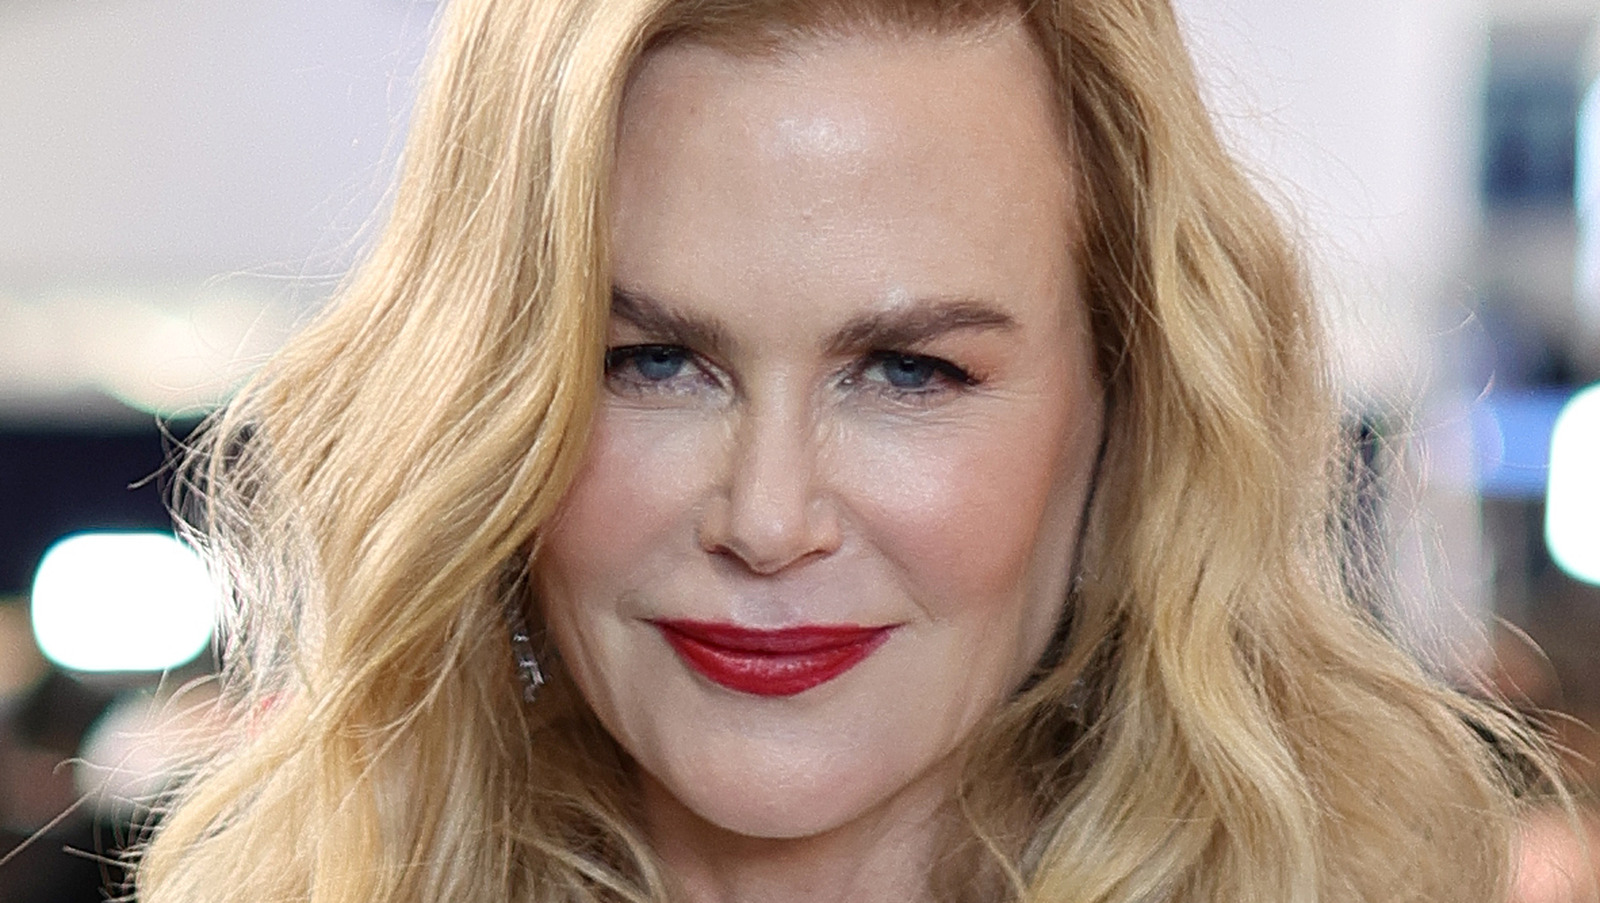 Nicole Kidman Talks Being a Mom in Crisis on HBO's 'The Undoing' – SheKnows